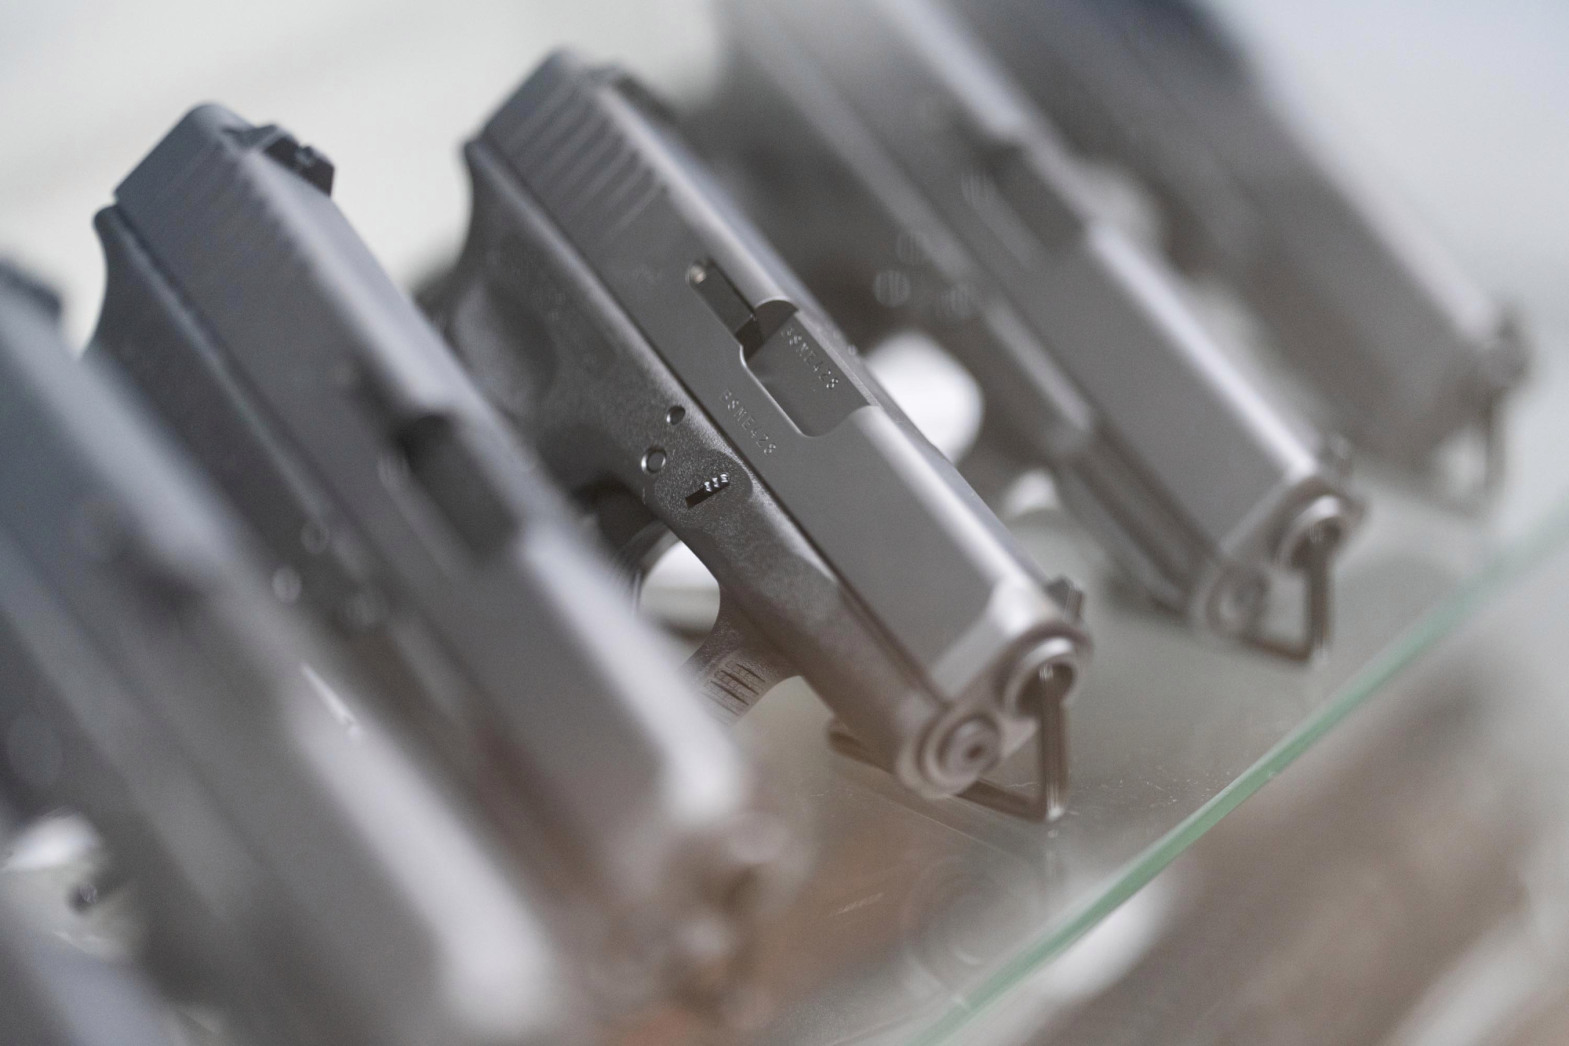 Handgun sale ban to under 21-year-olds is unconstitutional, appeals court says